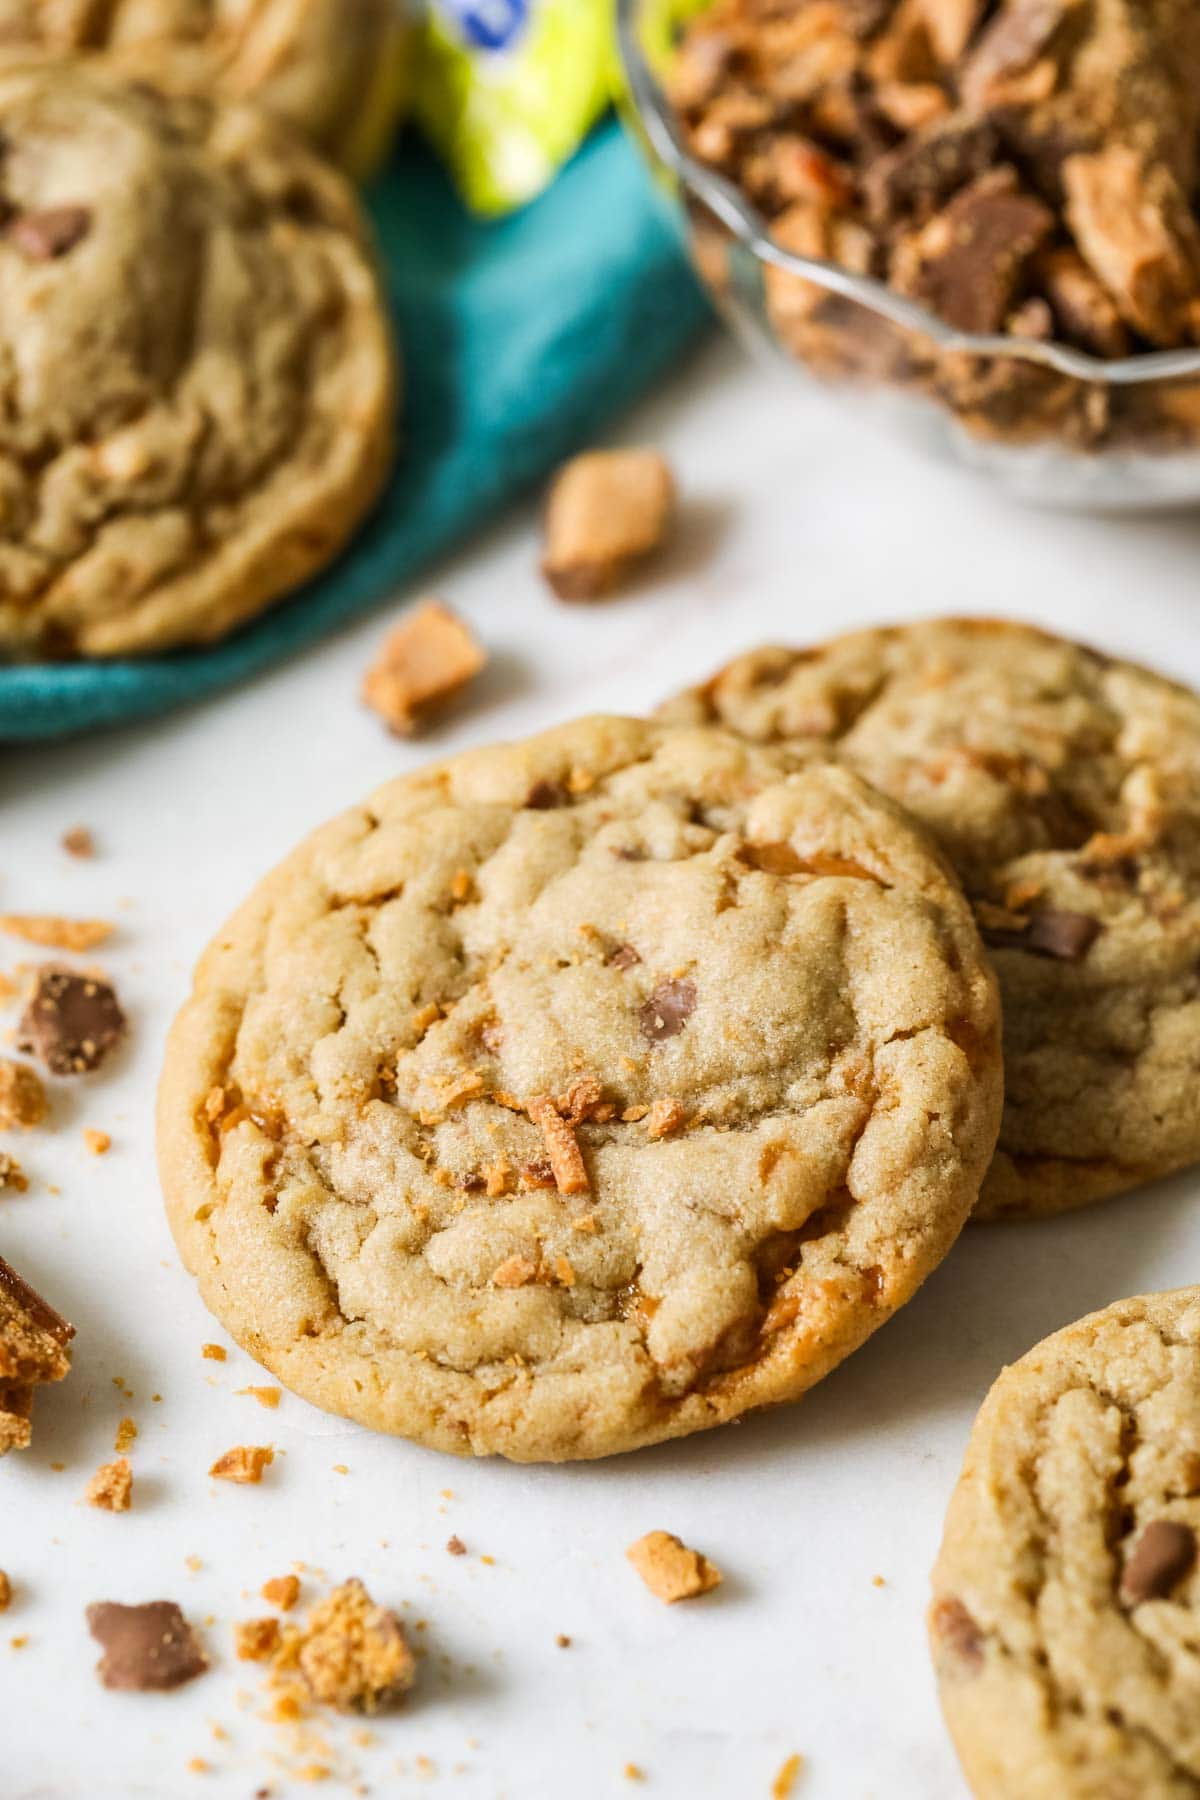 Two butterfinger cookies surrounded by crushed up butterfinger pieces.